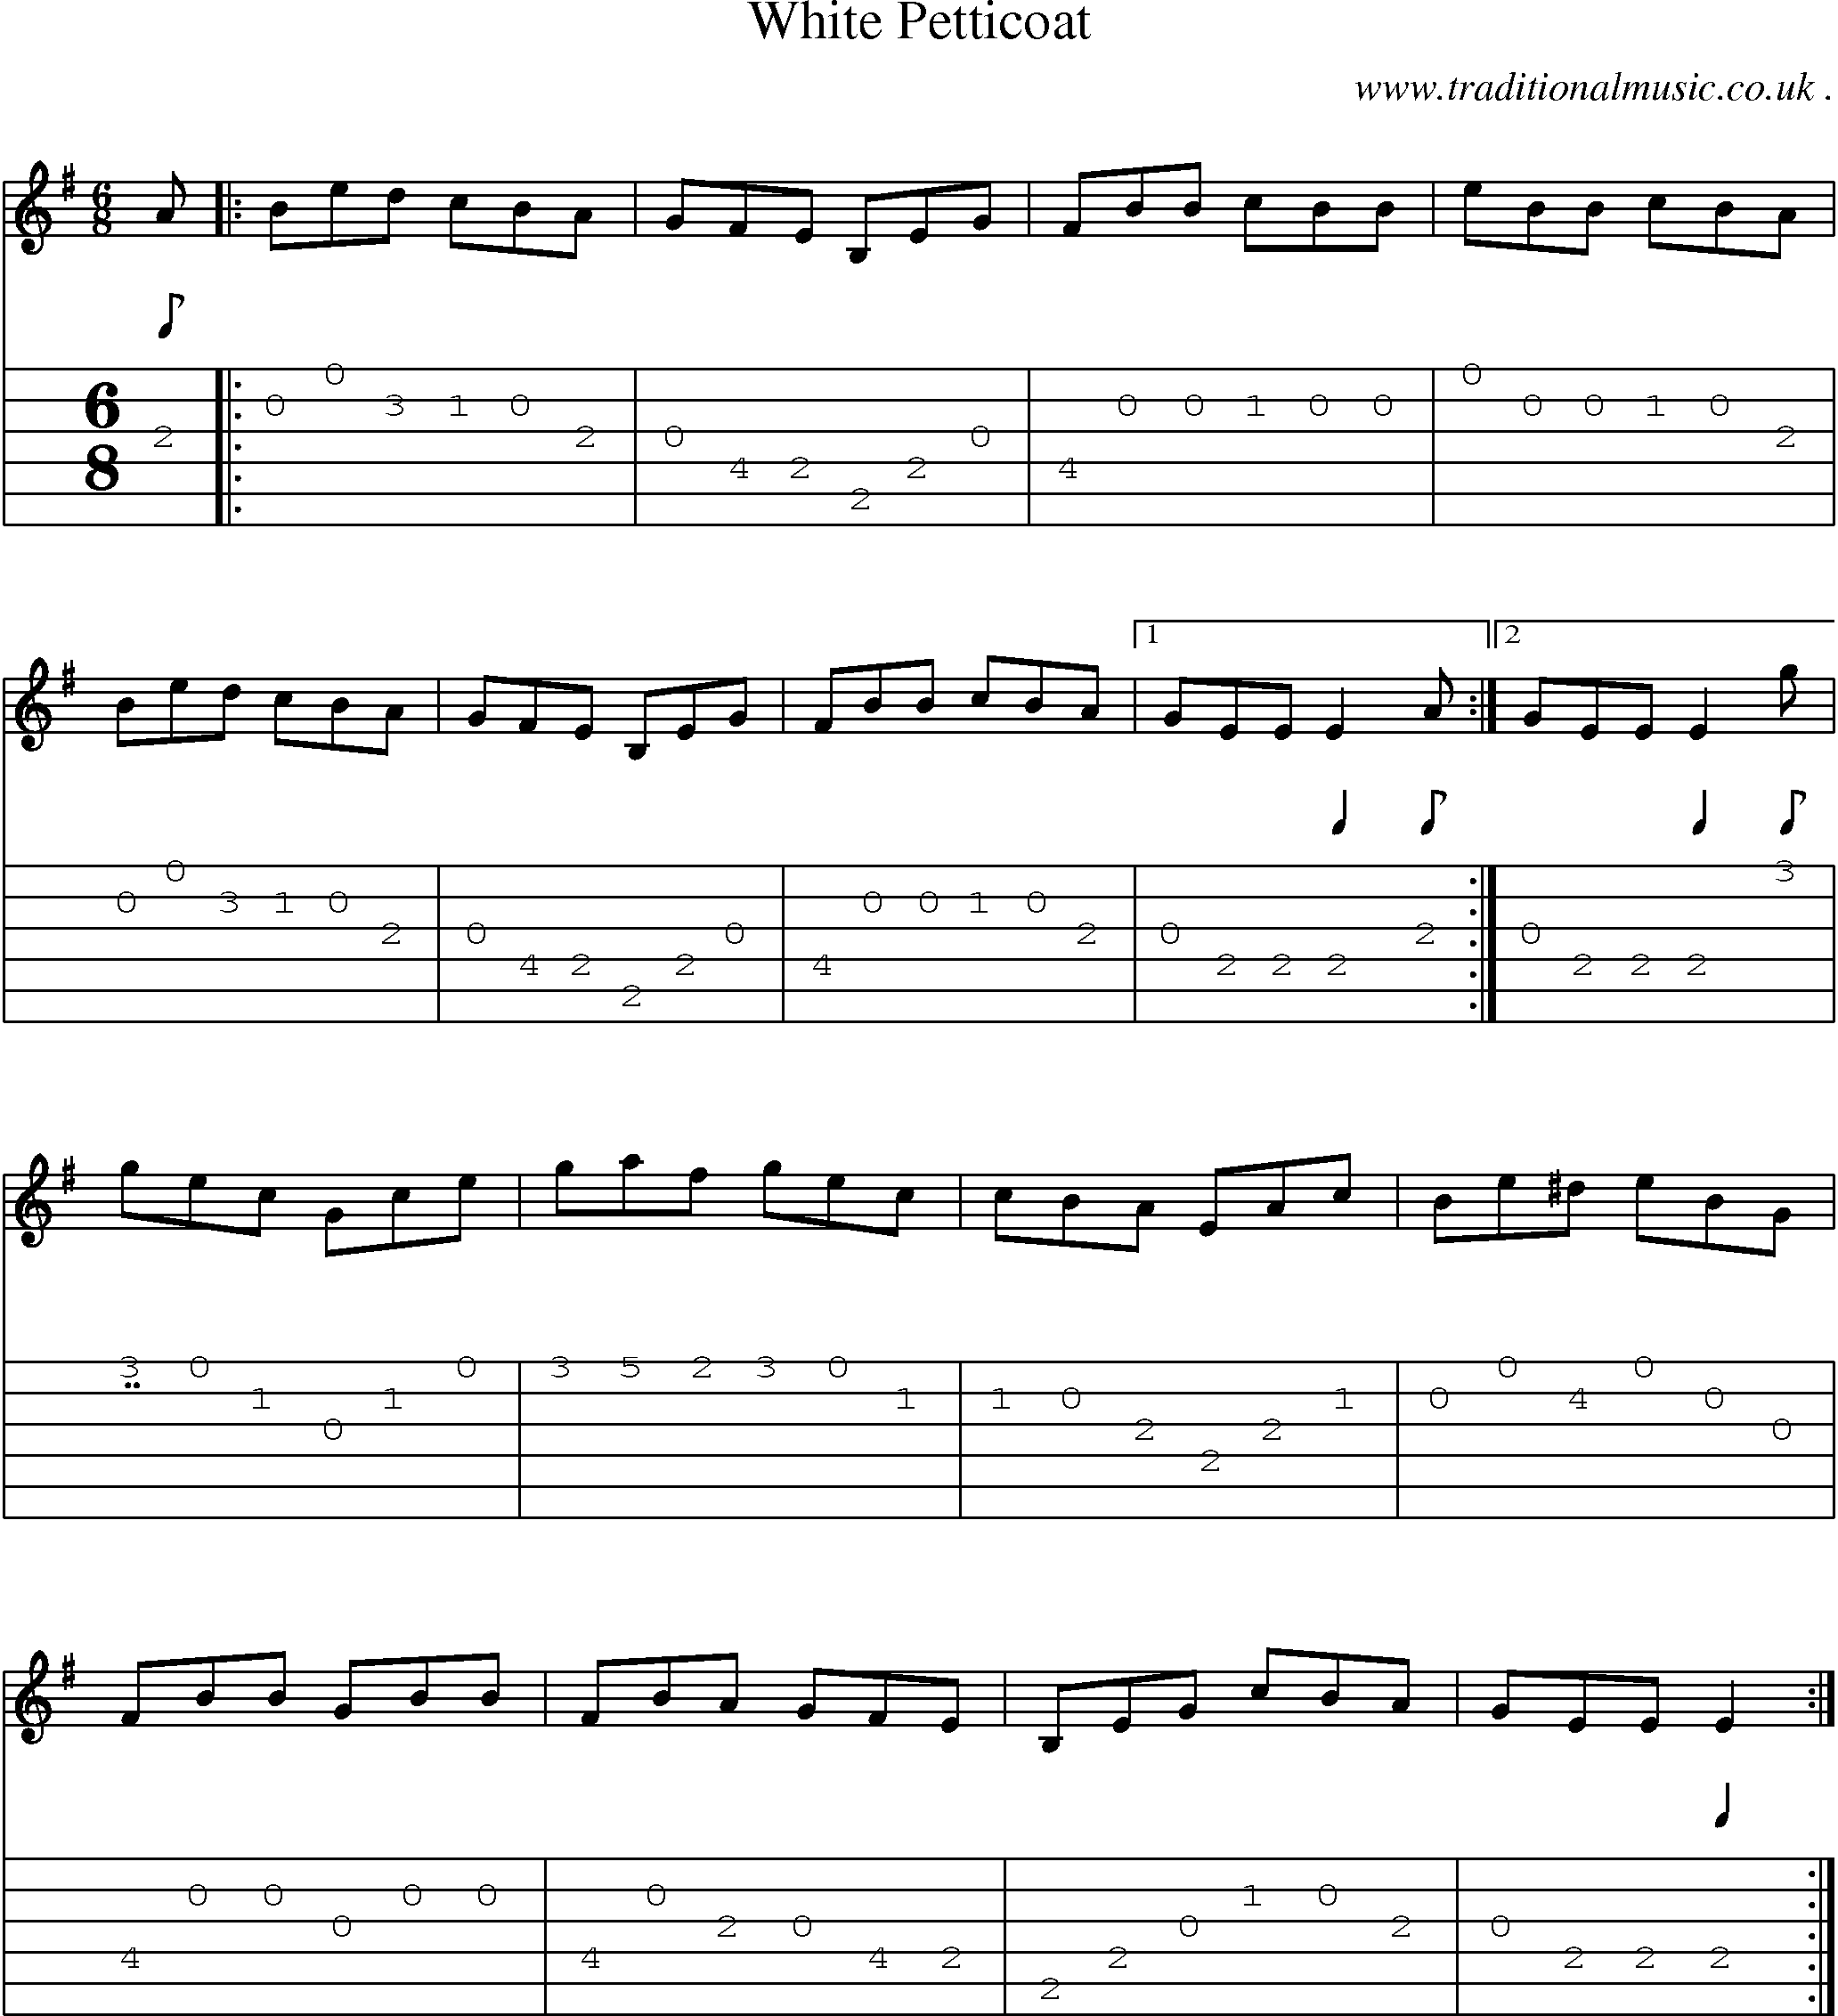 Sheet-Music and Guitar Tabs for White Petticoat